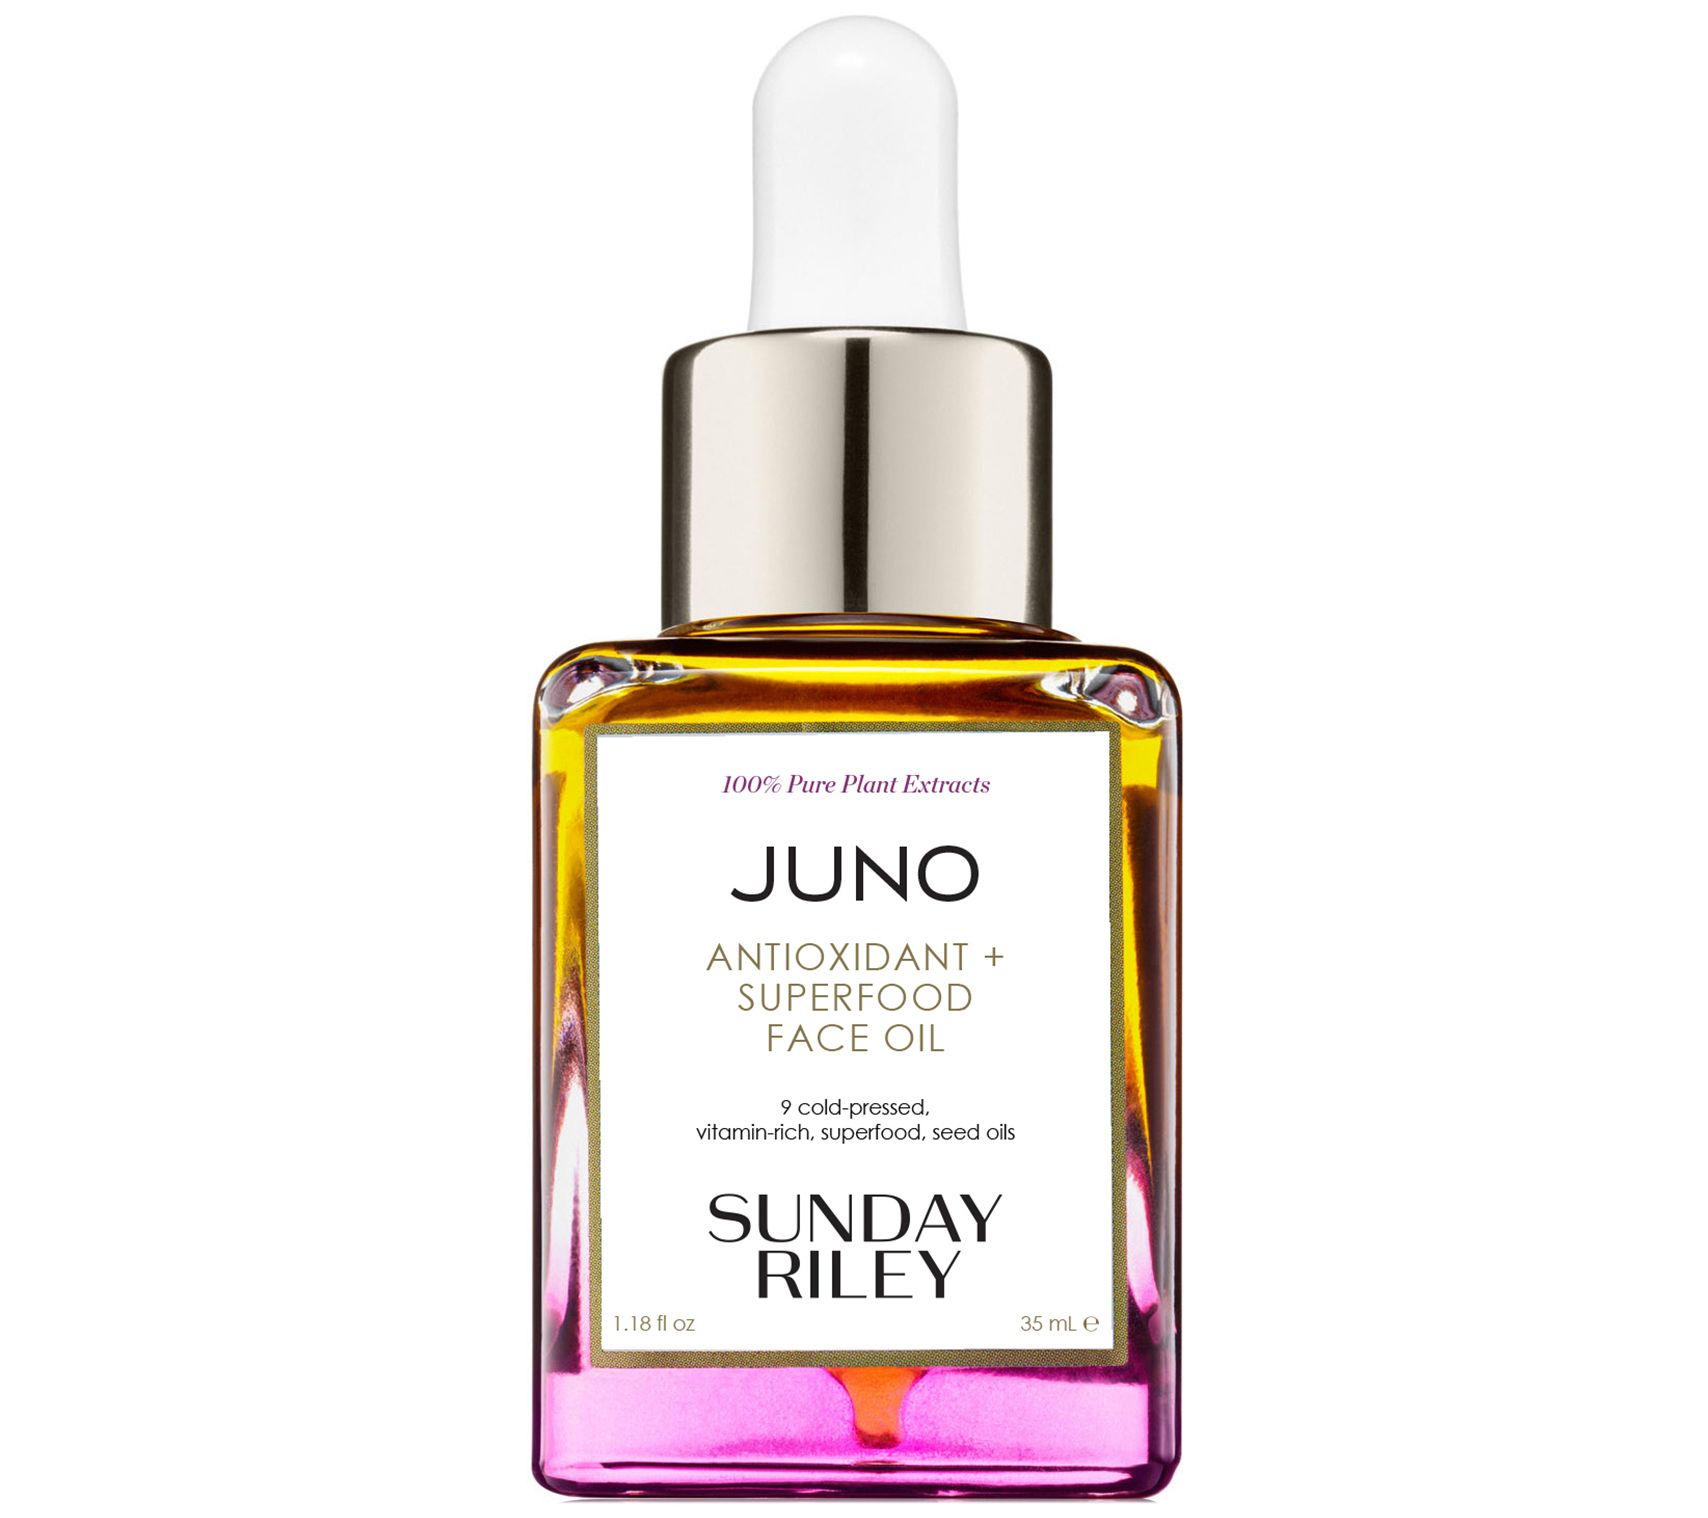 Juno face oil by Sunday Riley